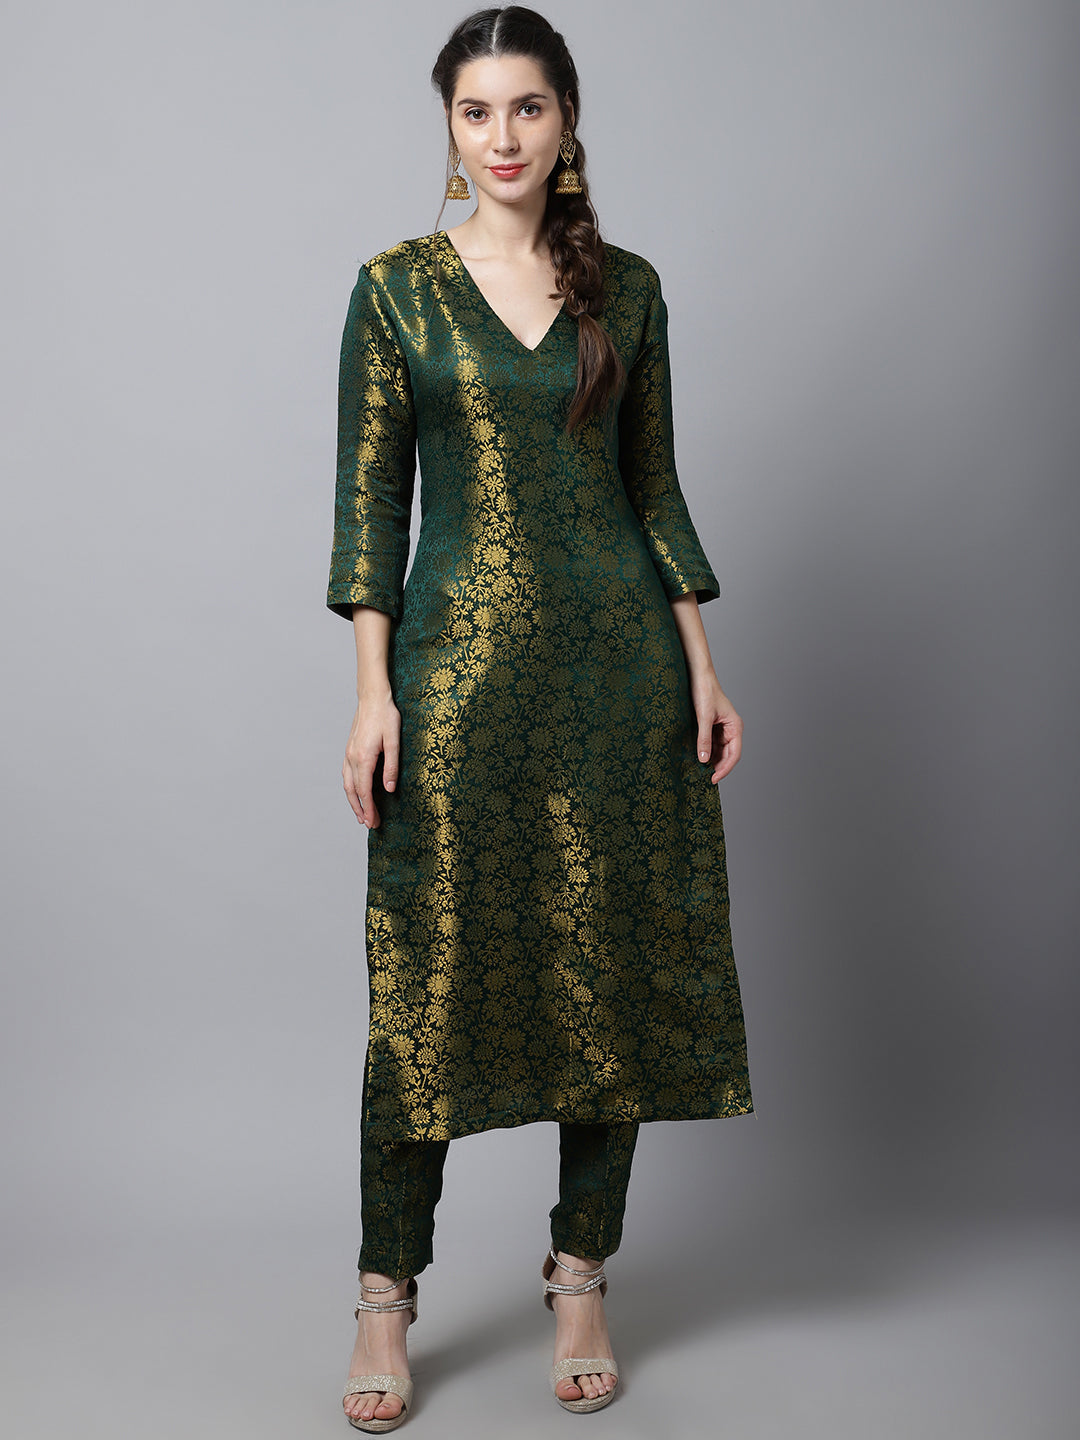 Buy Tierra Boutique Women's Green Hand Block Printed Cotton Kurti with Straight  Pant Set for Young Girls - L at Amazon.in